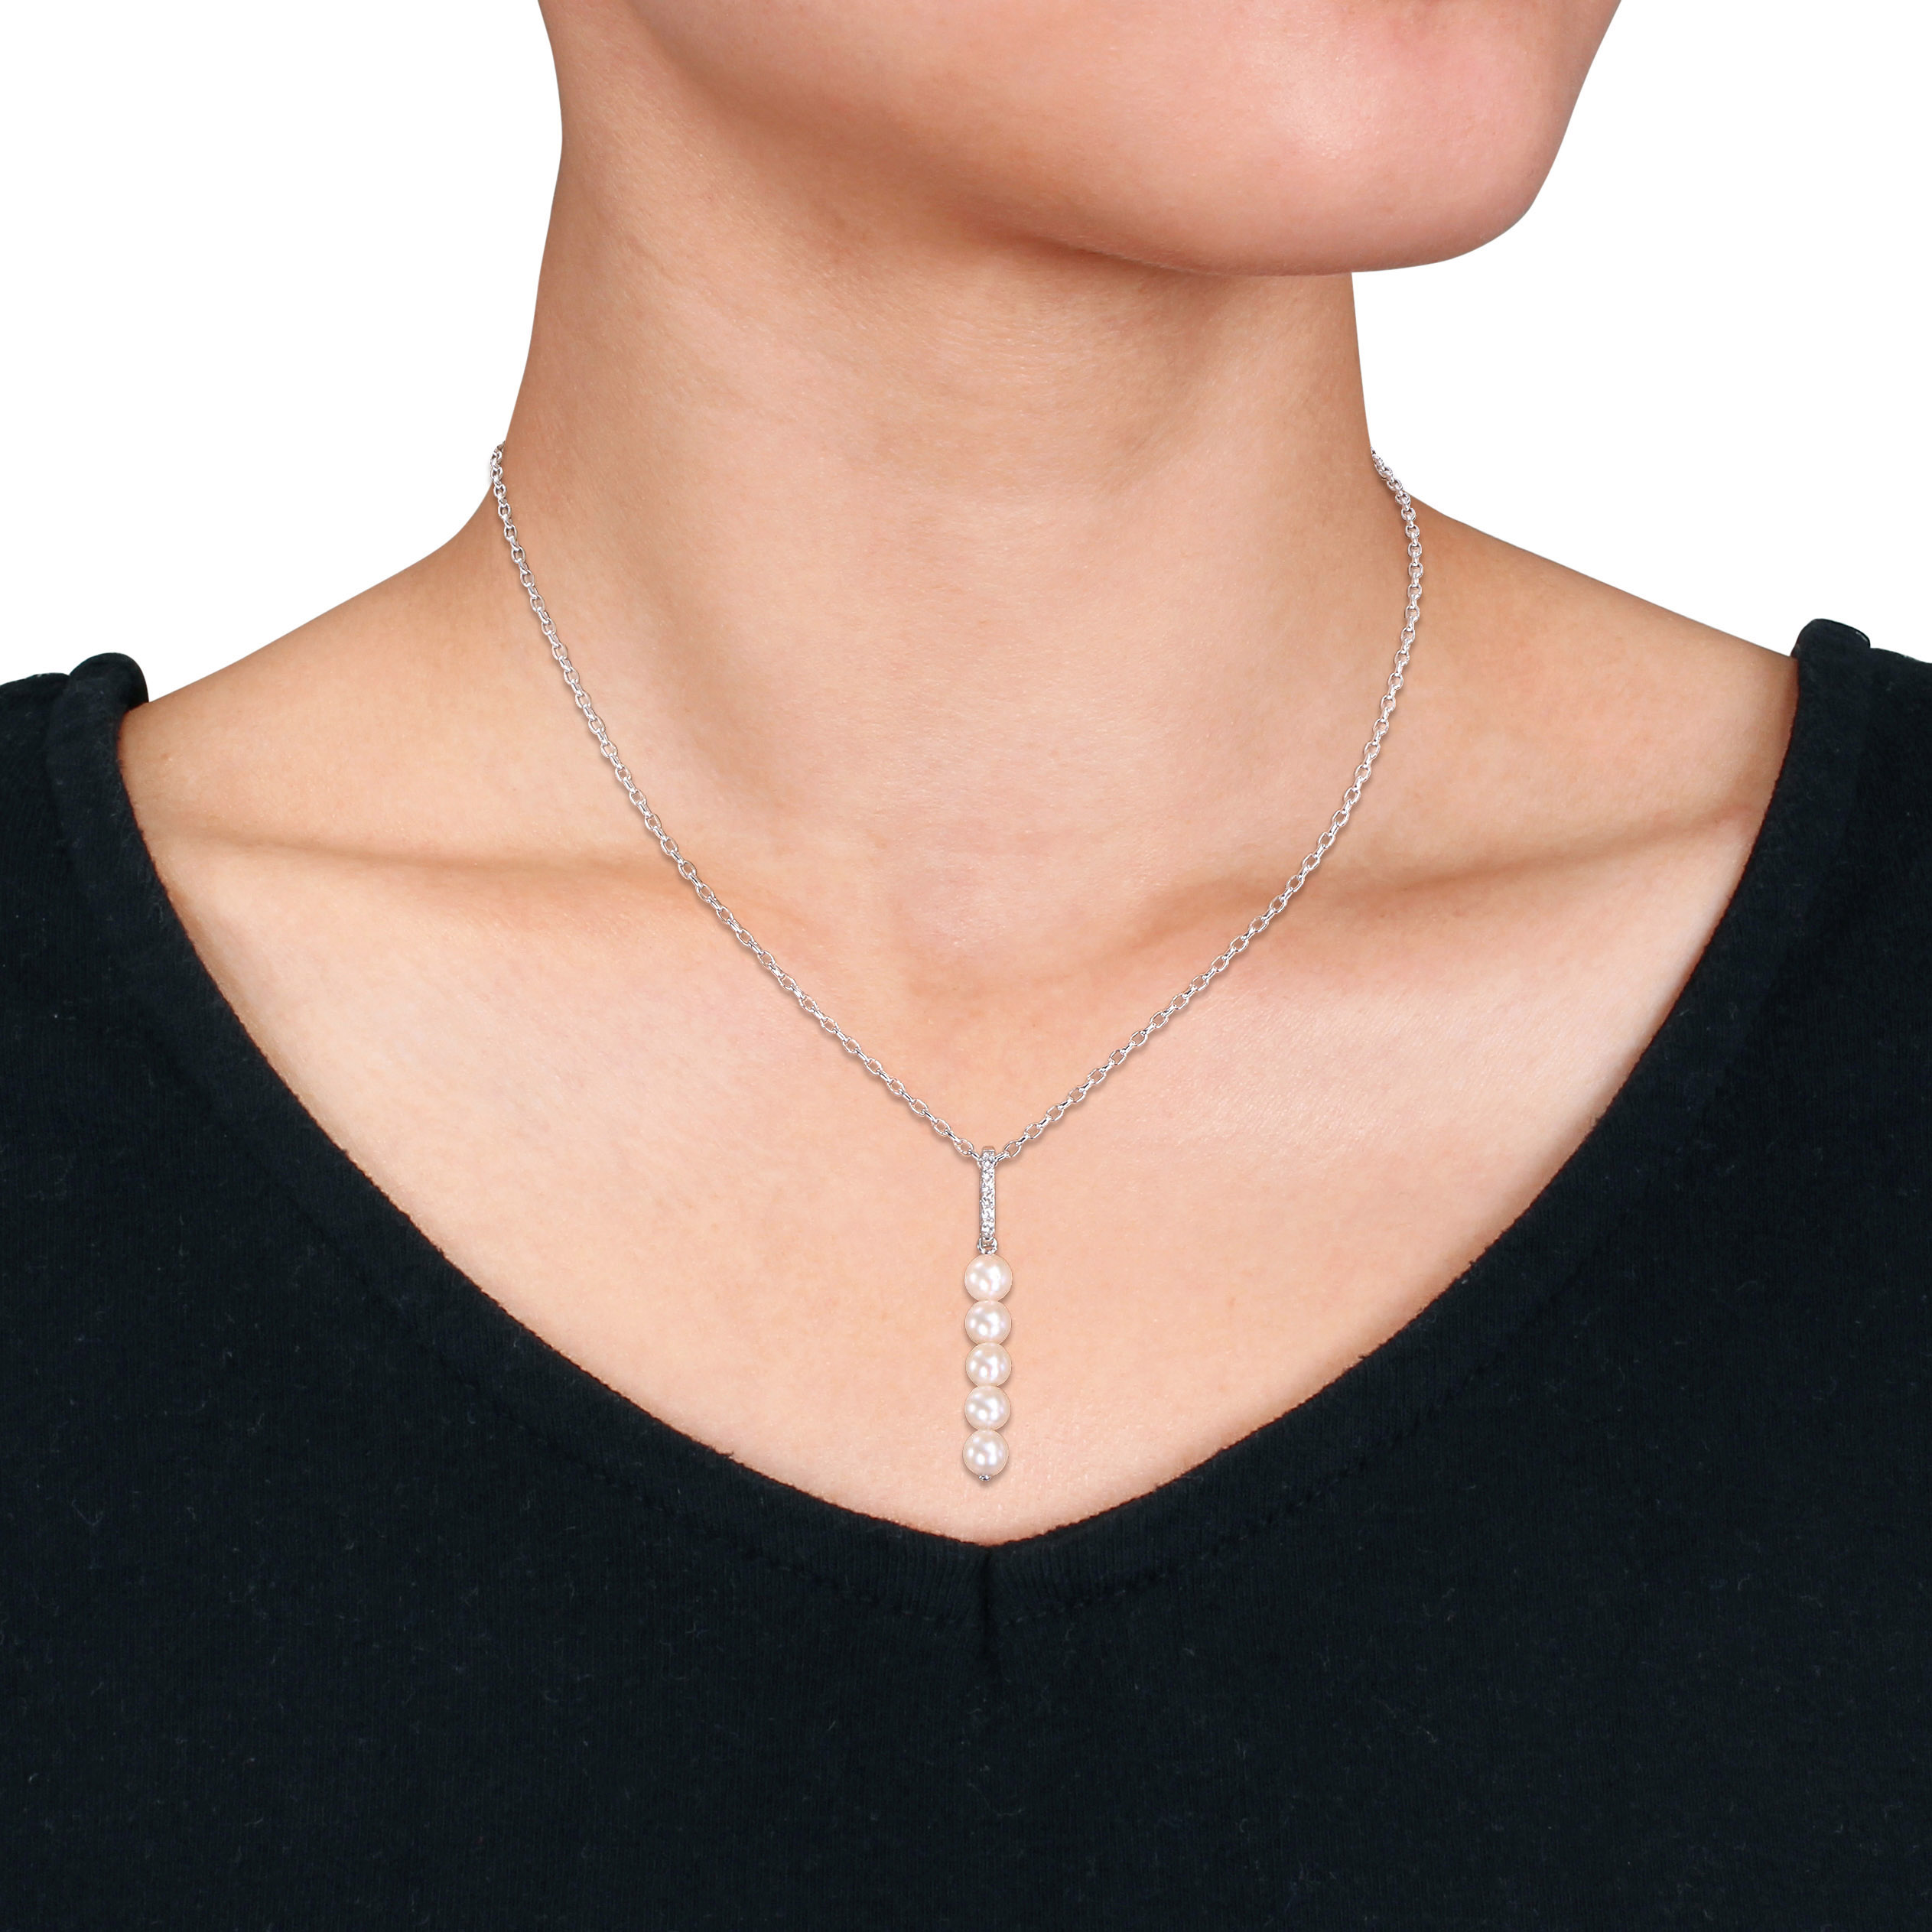 5.5-6 MM Freshwater Cultured Pearl and 1/5 CT TGW White Topaz Drop Pendant with Chain in Sterling Silver - 18 in.